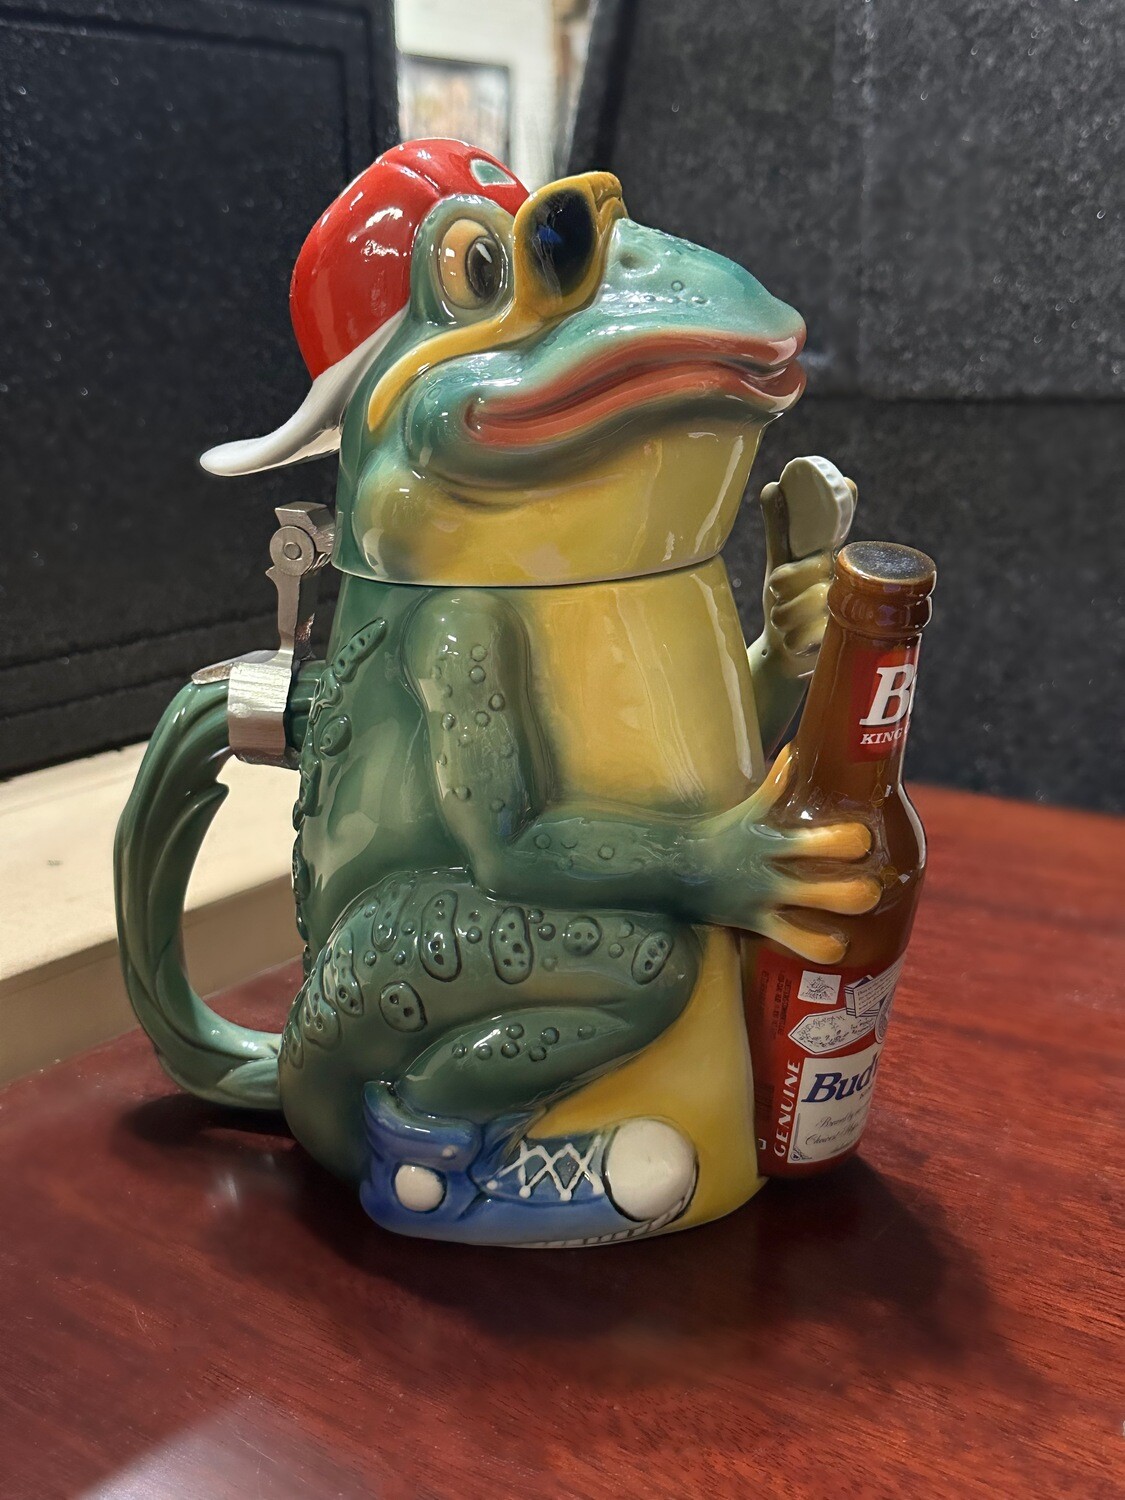 Budweiser BUD Frog Stein 1996 Limited Edition Anheuser/Busch#7488 Of 10,000 RARE